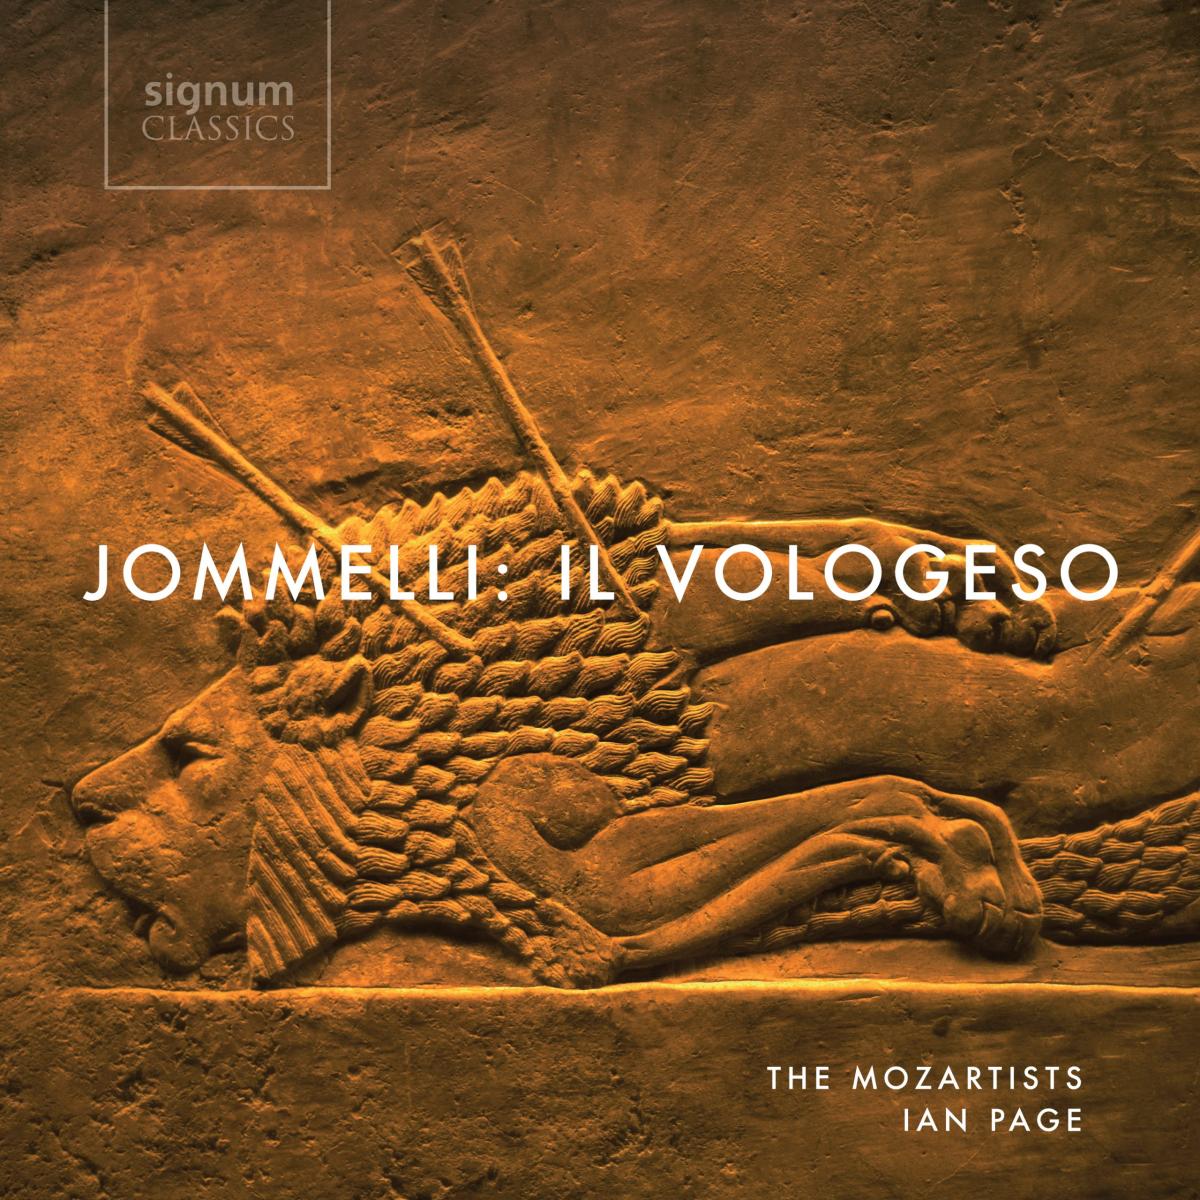 A new recording of Jommelli’s little-known opera Il Vologeso by Ian Page’s The Mozartists revives a piece that has perhaps unfairly been overlooked.